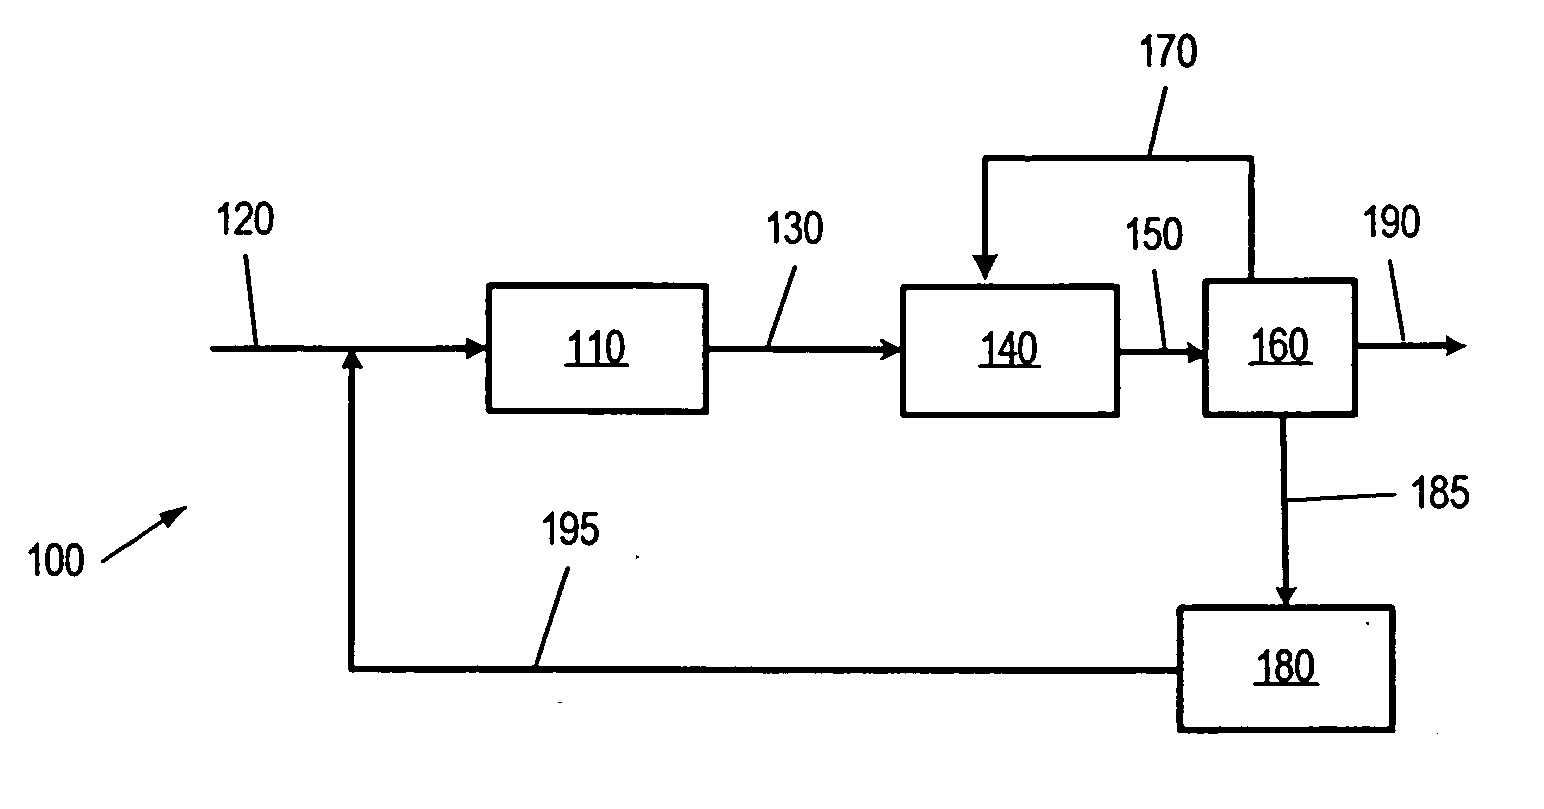 Methods of preparing branched alkyl aromatic hydrocarbons